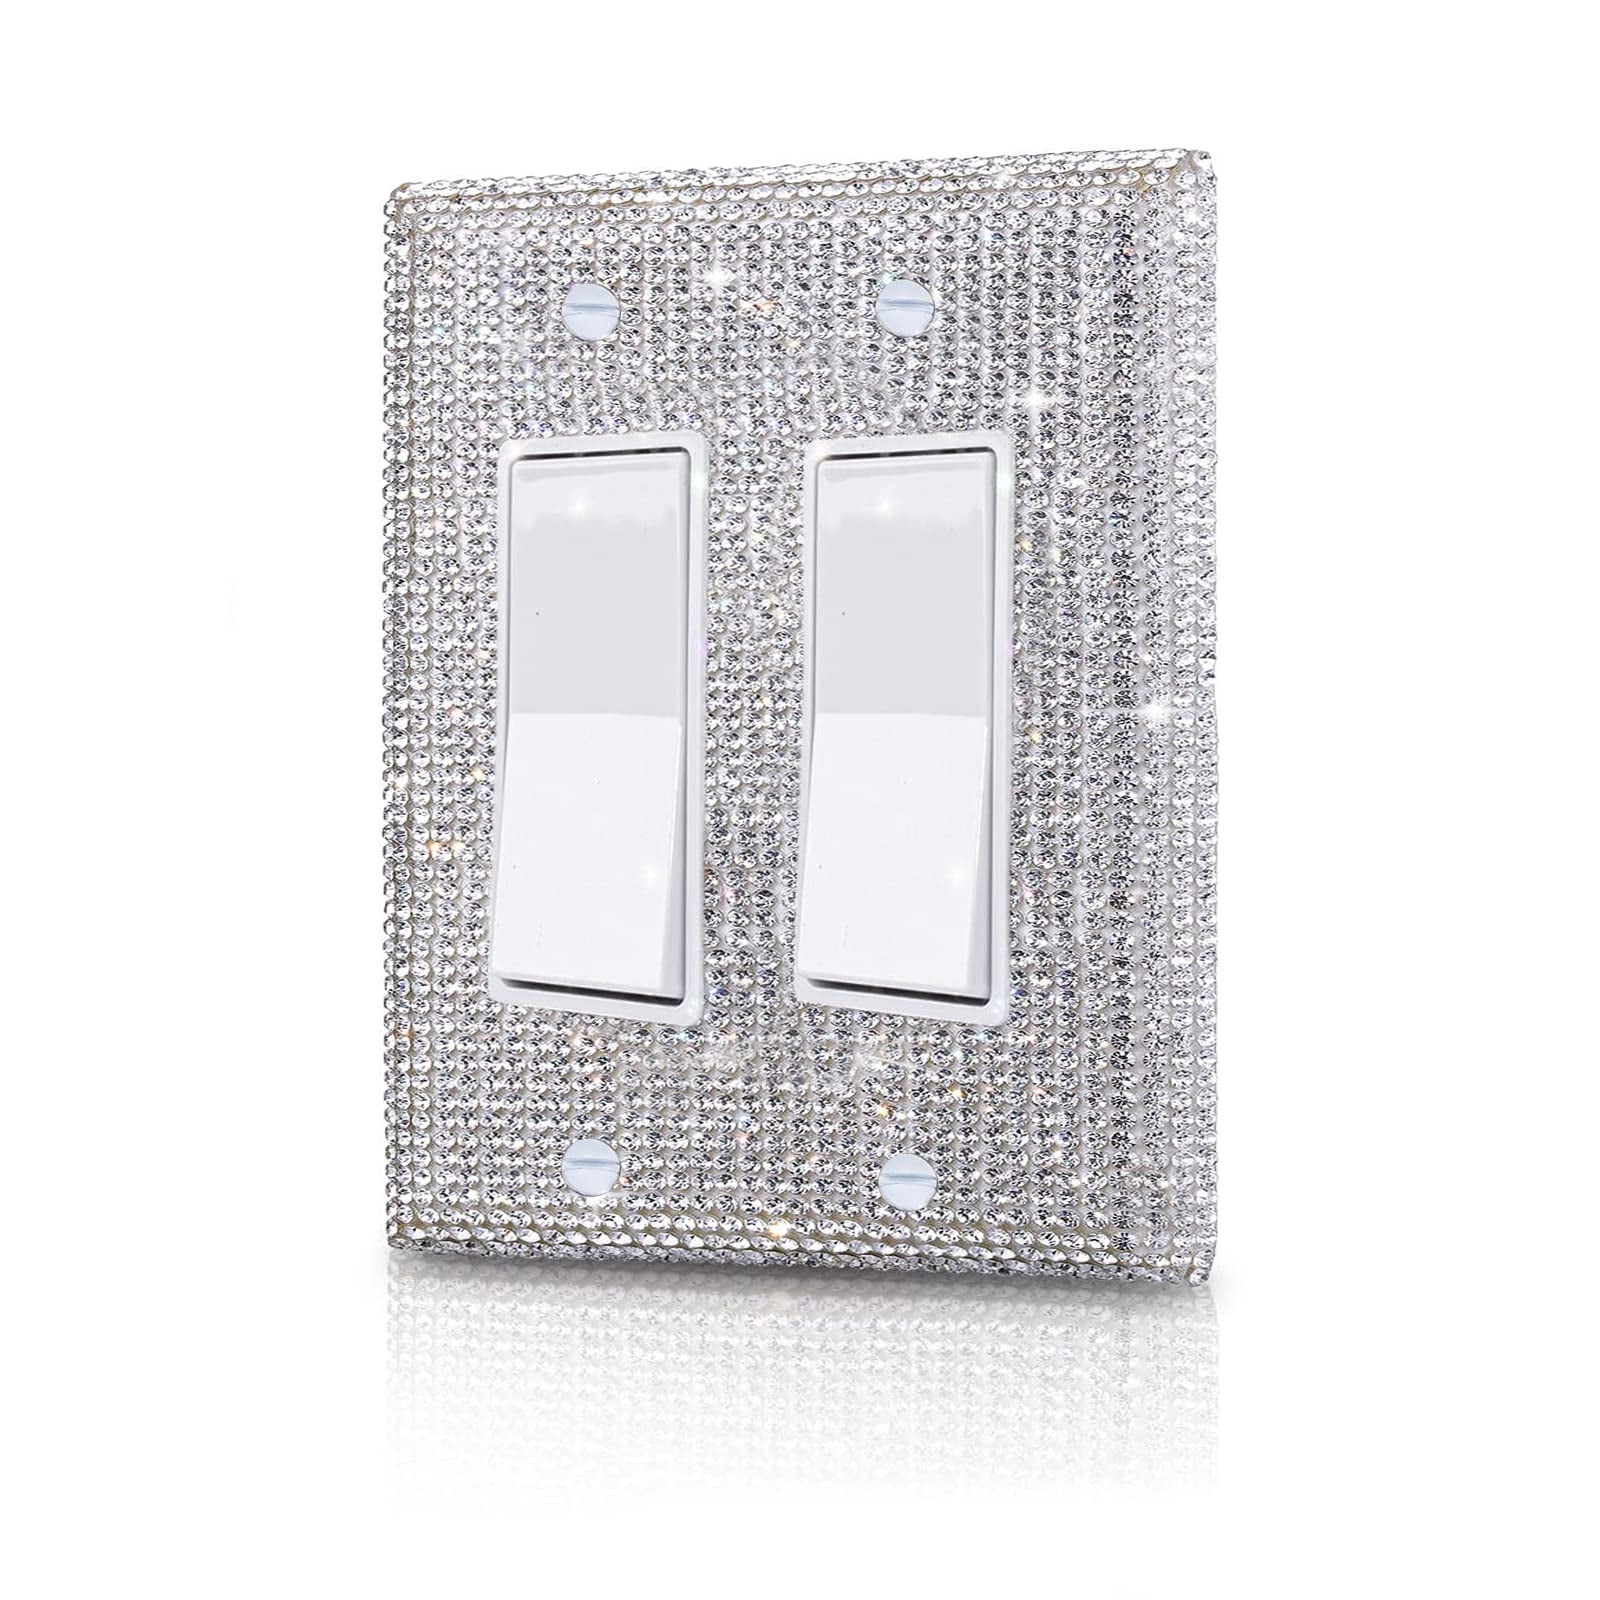 Silver Shiny Silver Rhinestones Wall Plates Light Switch Cover Plate Decorative Wall Plate Double Socket Toggle for Home Outlet Covers 